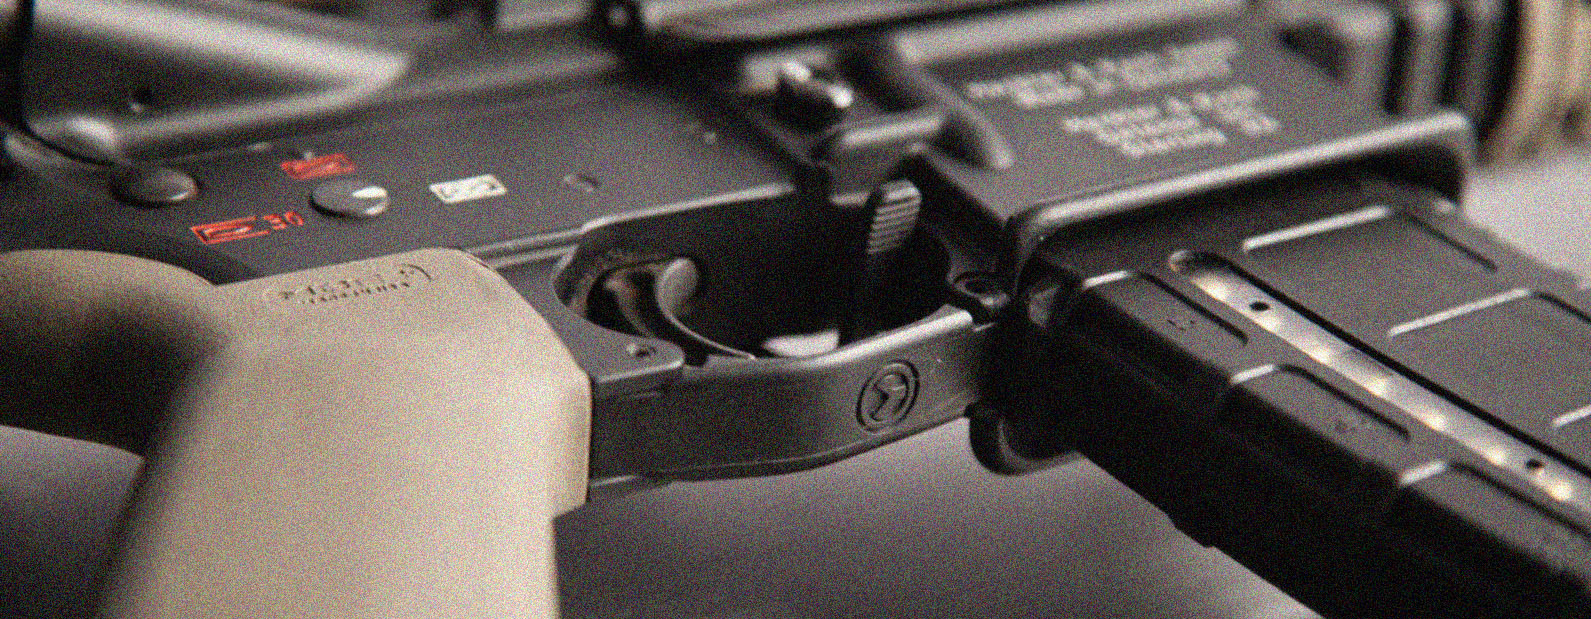 How to install Magpul enhanced trigger guard?